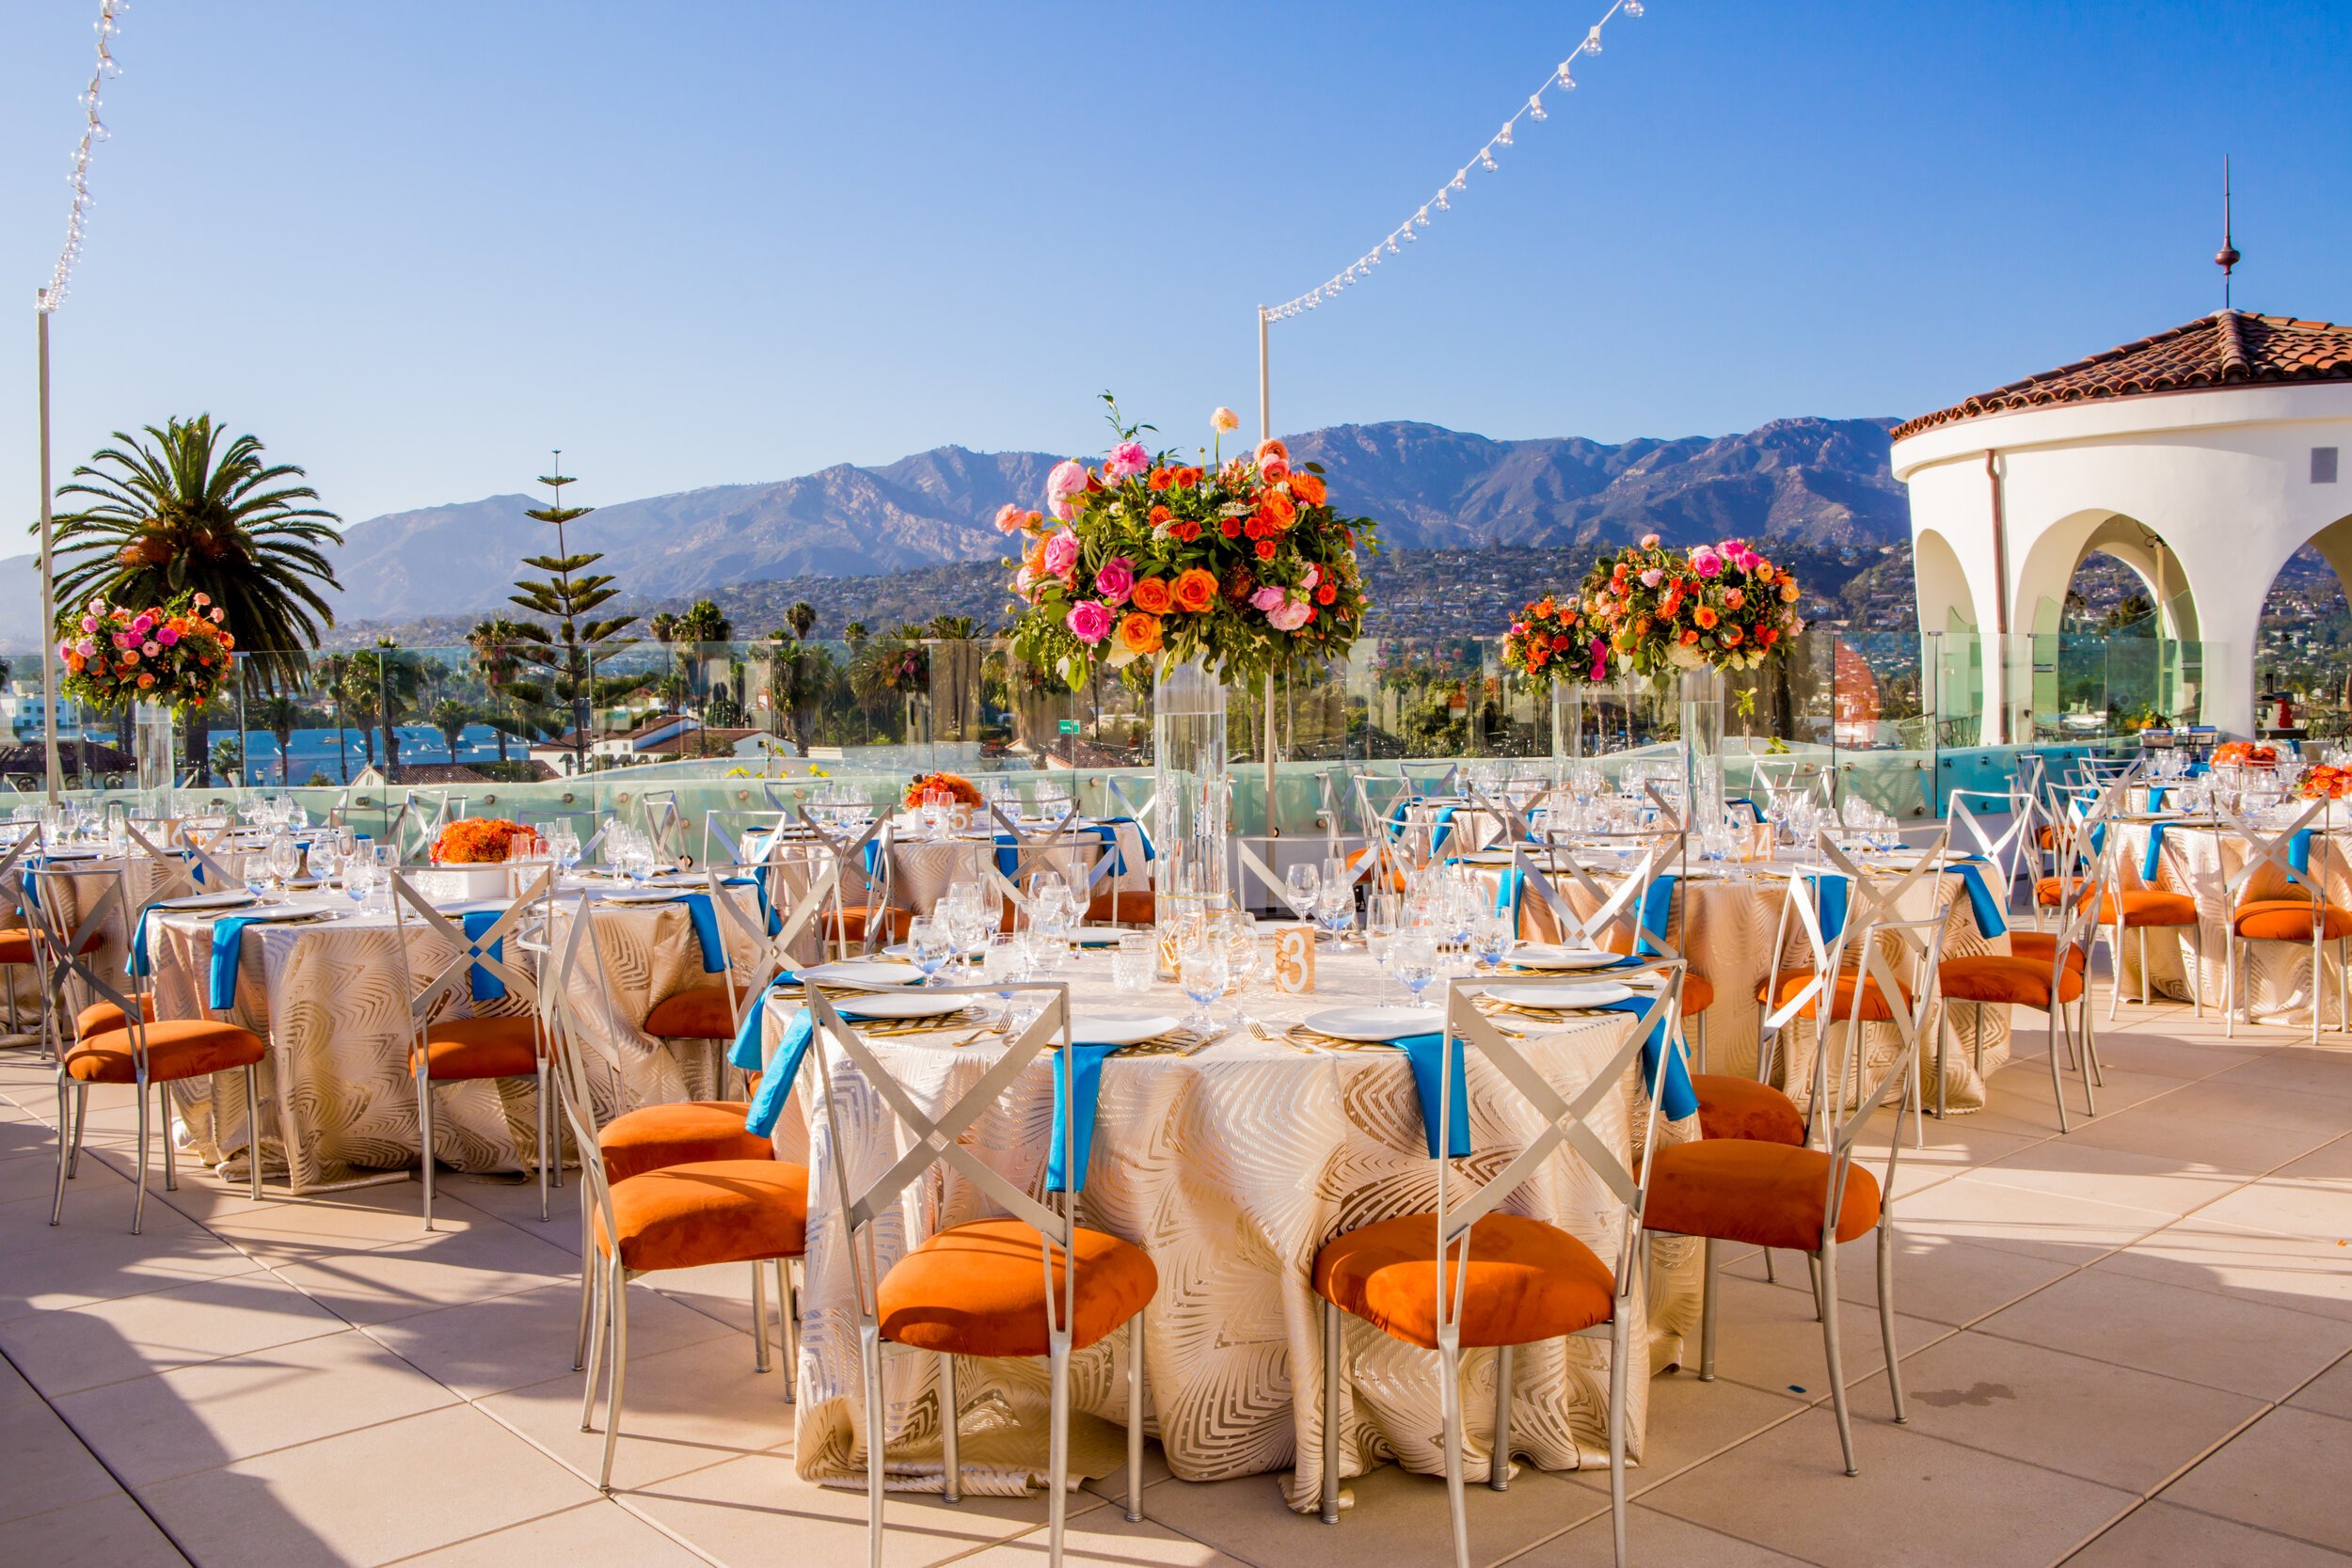 www.santabarbarawedding.com | Bright Event Rentals | Colorful Rooftop Reception with Mountains in the Background